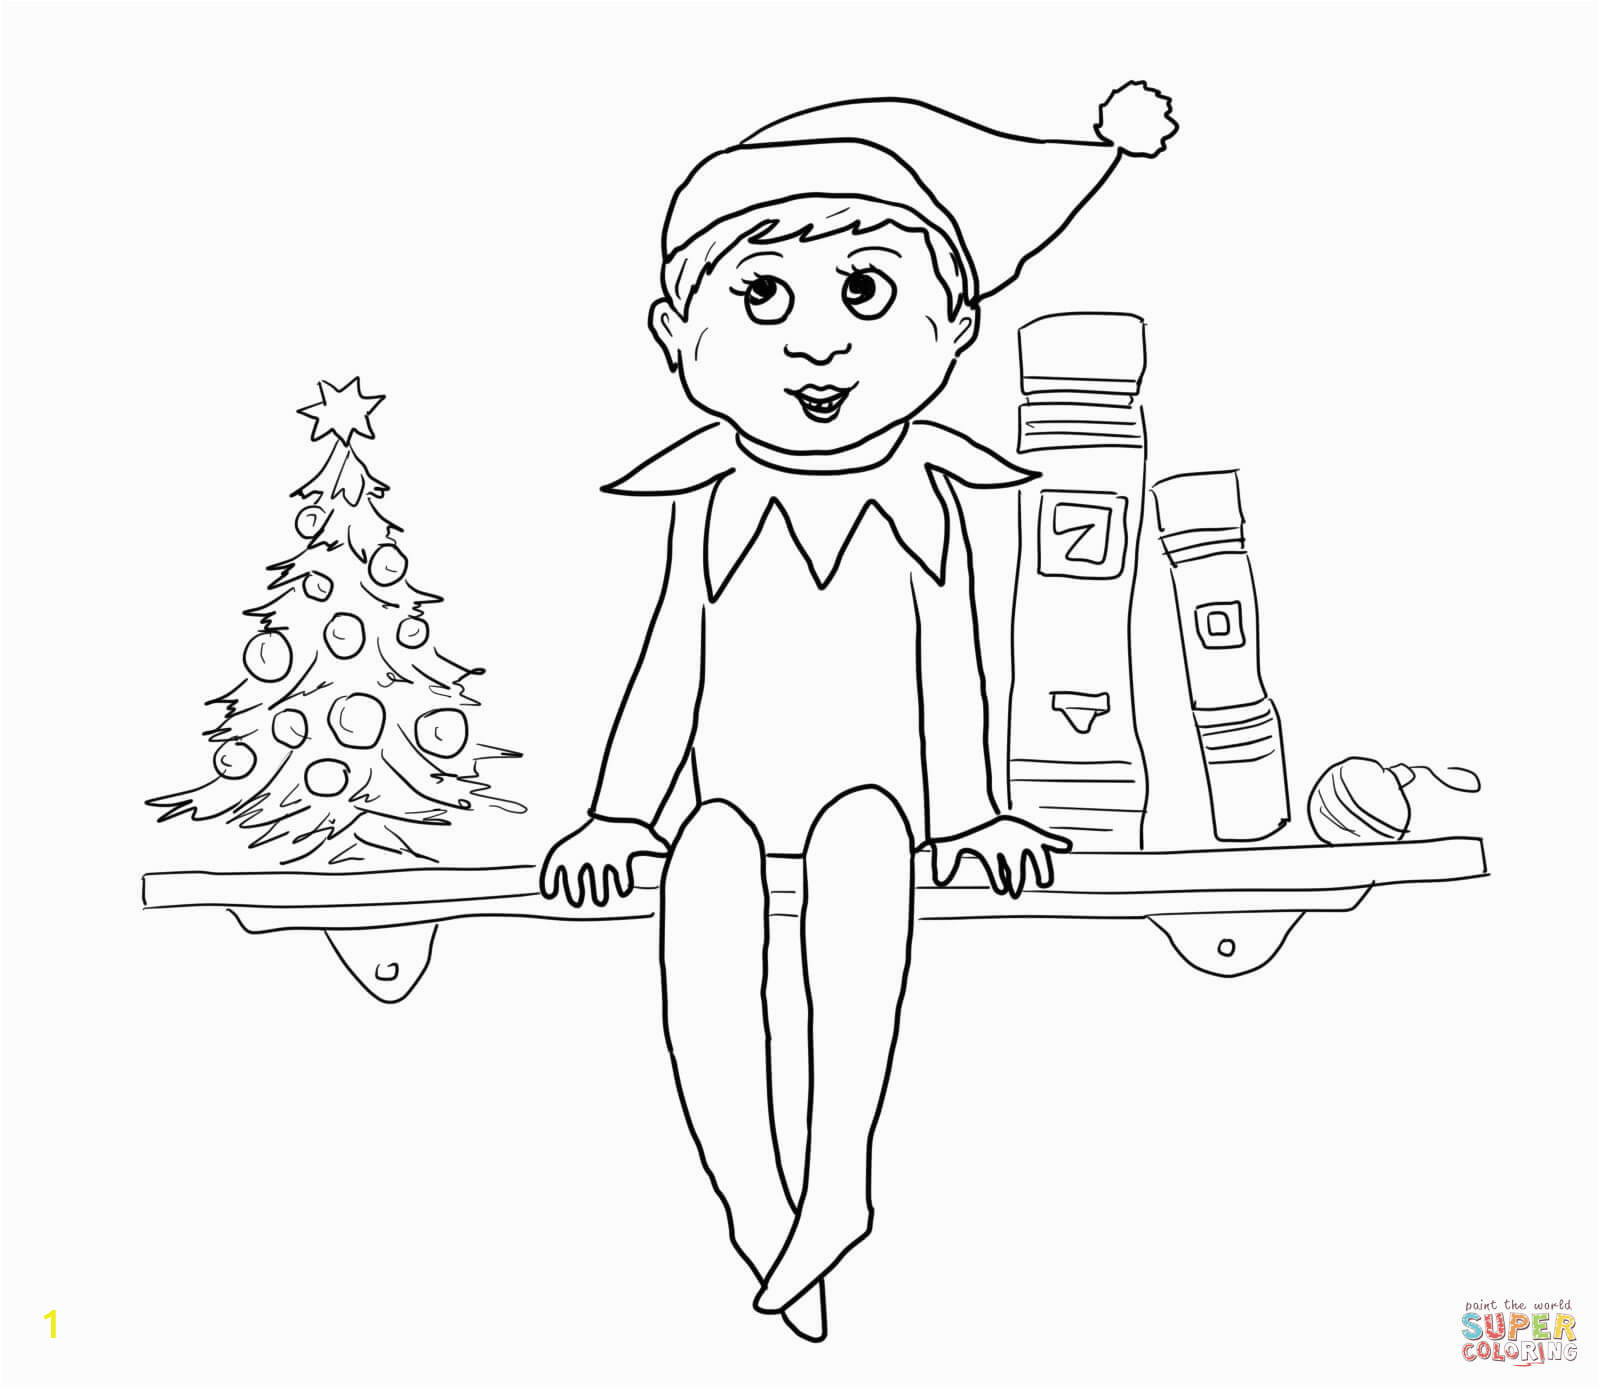 Elf On the Shelf Printable Coloring Pages Free Elf the Shelf Coloring Pages Coloring Home